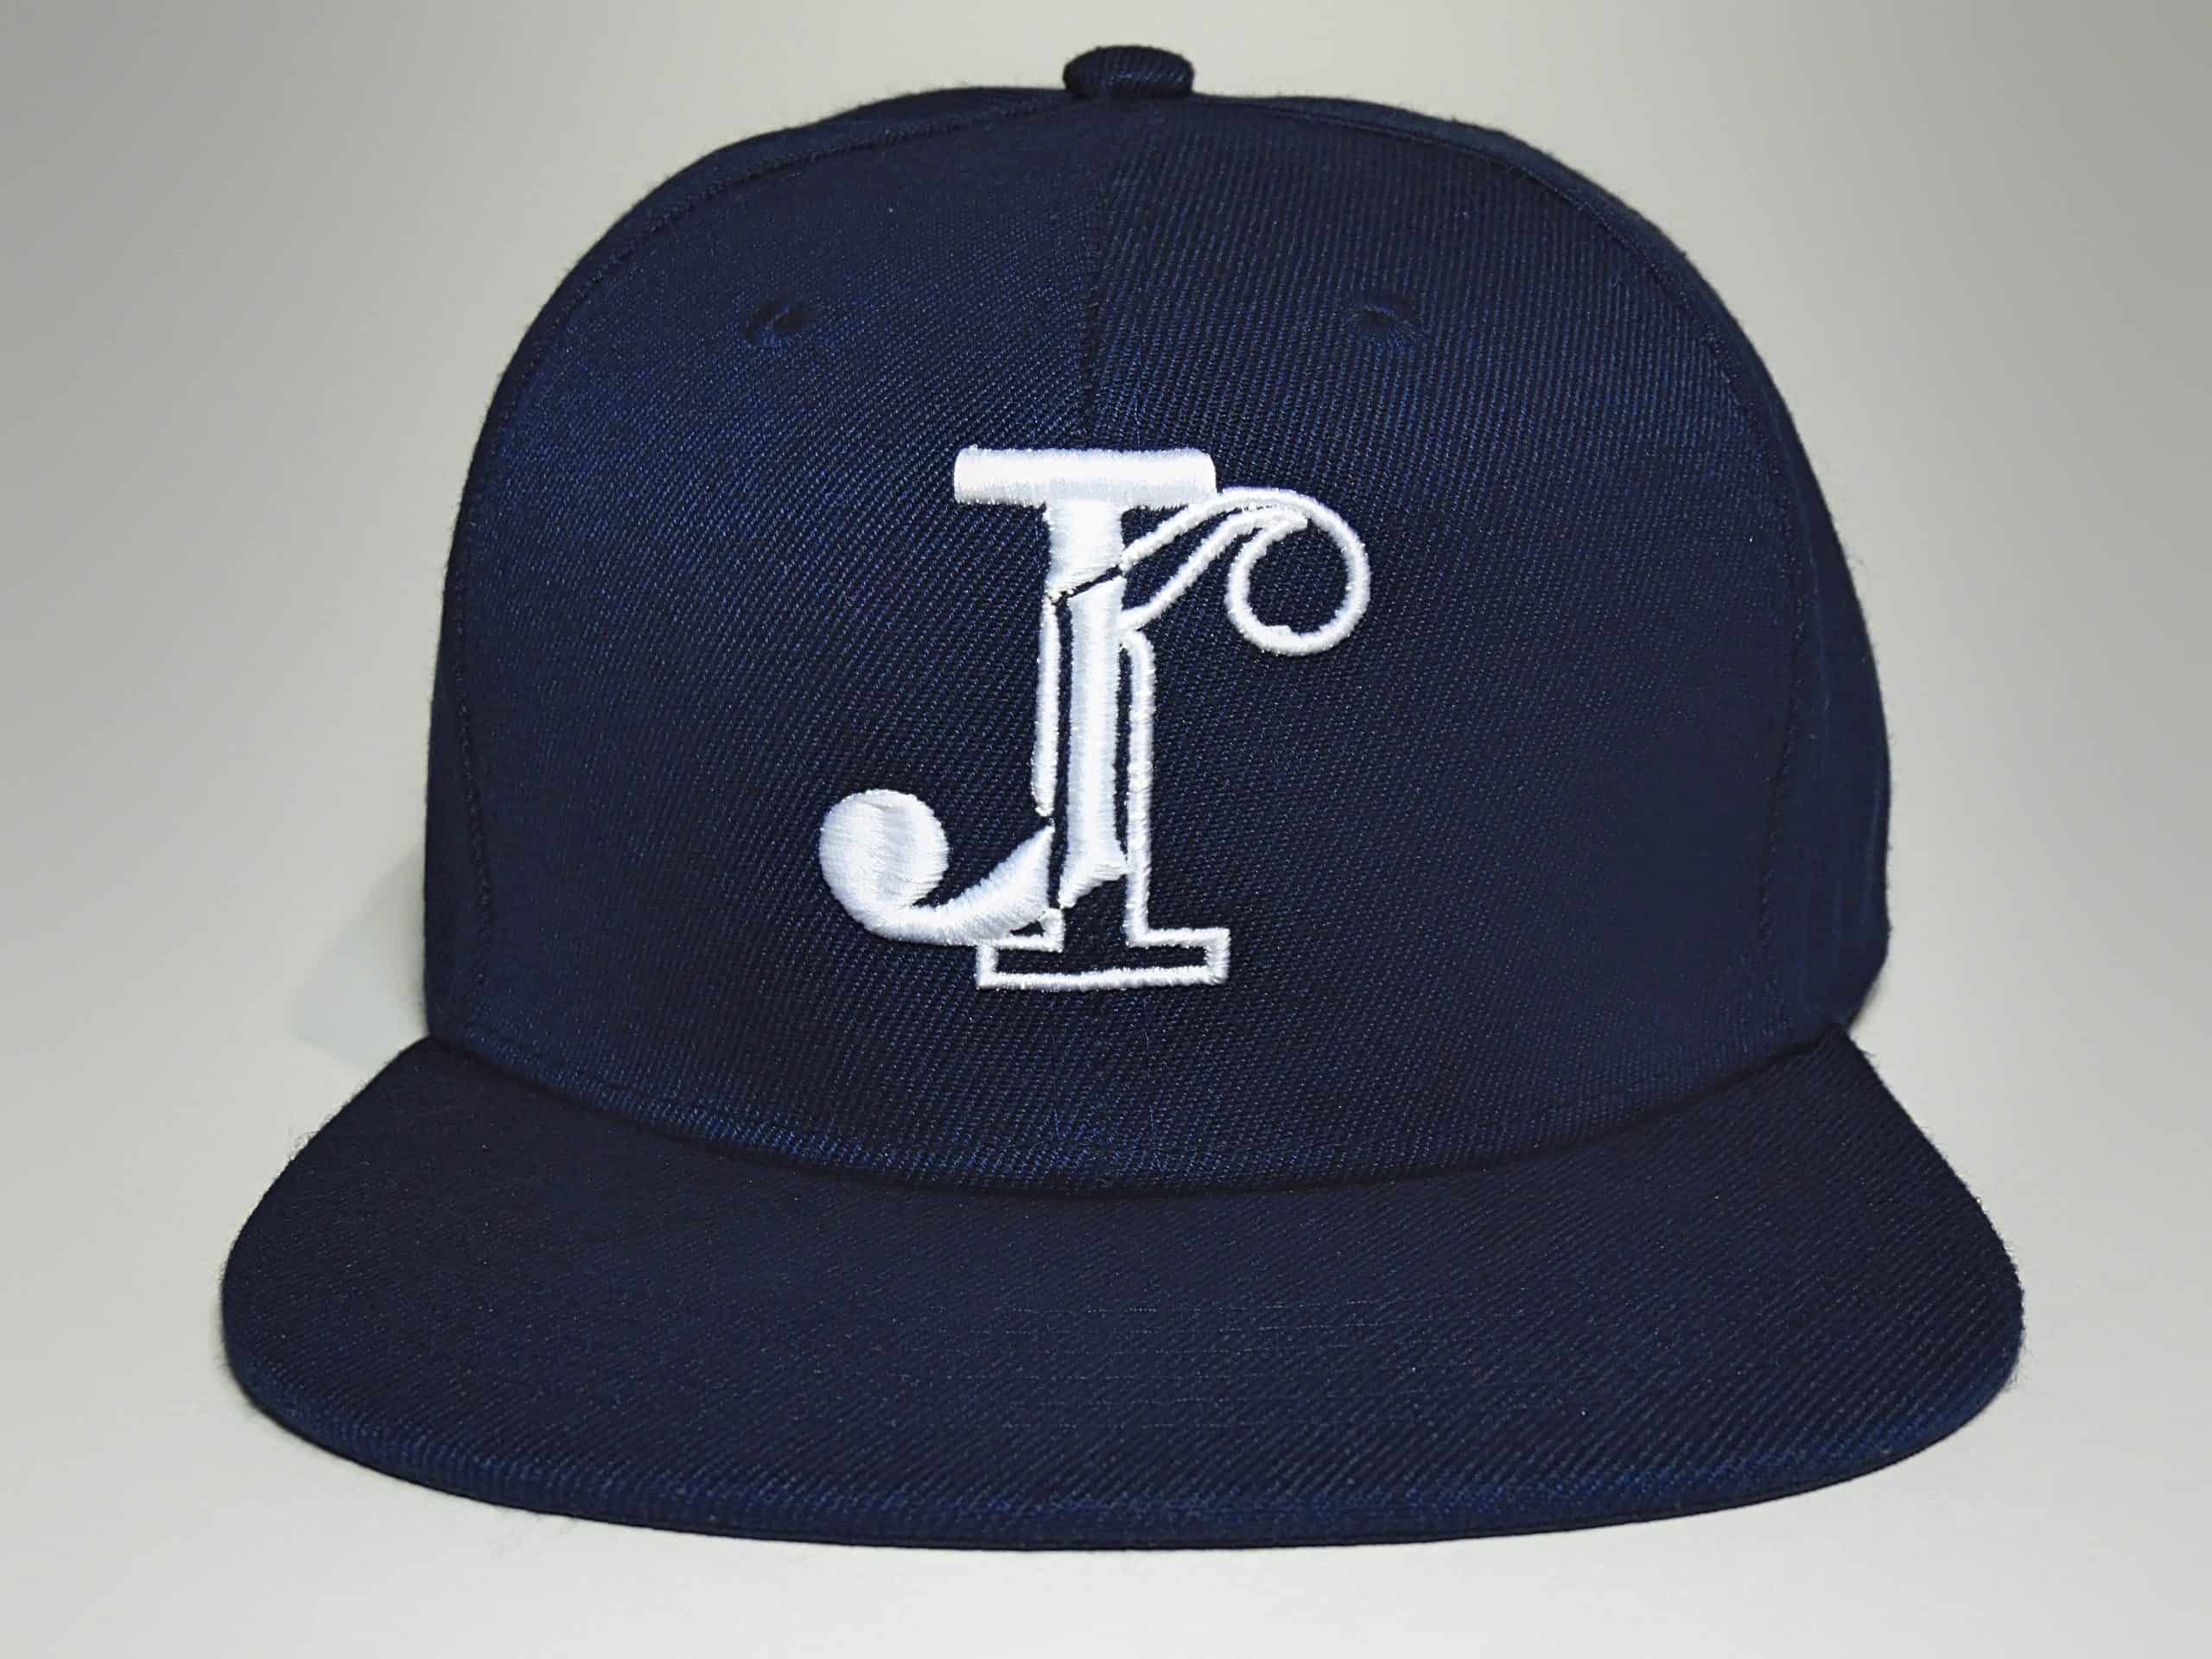 Jean-Jacques Navy Blue with White lettering, Snapback Cap Baseball